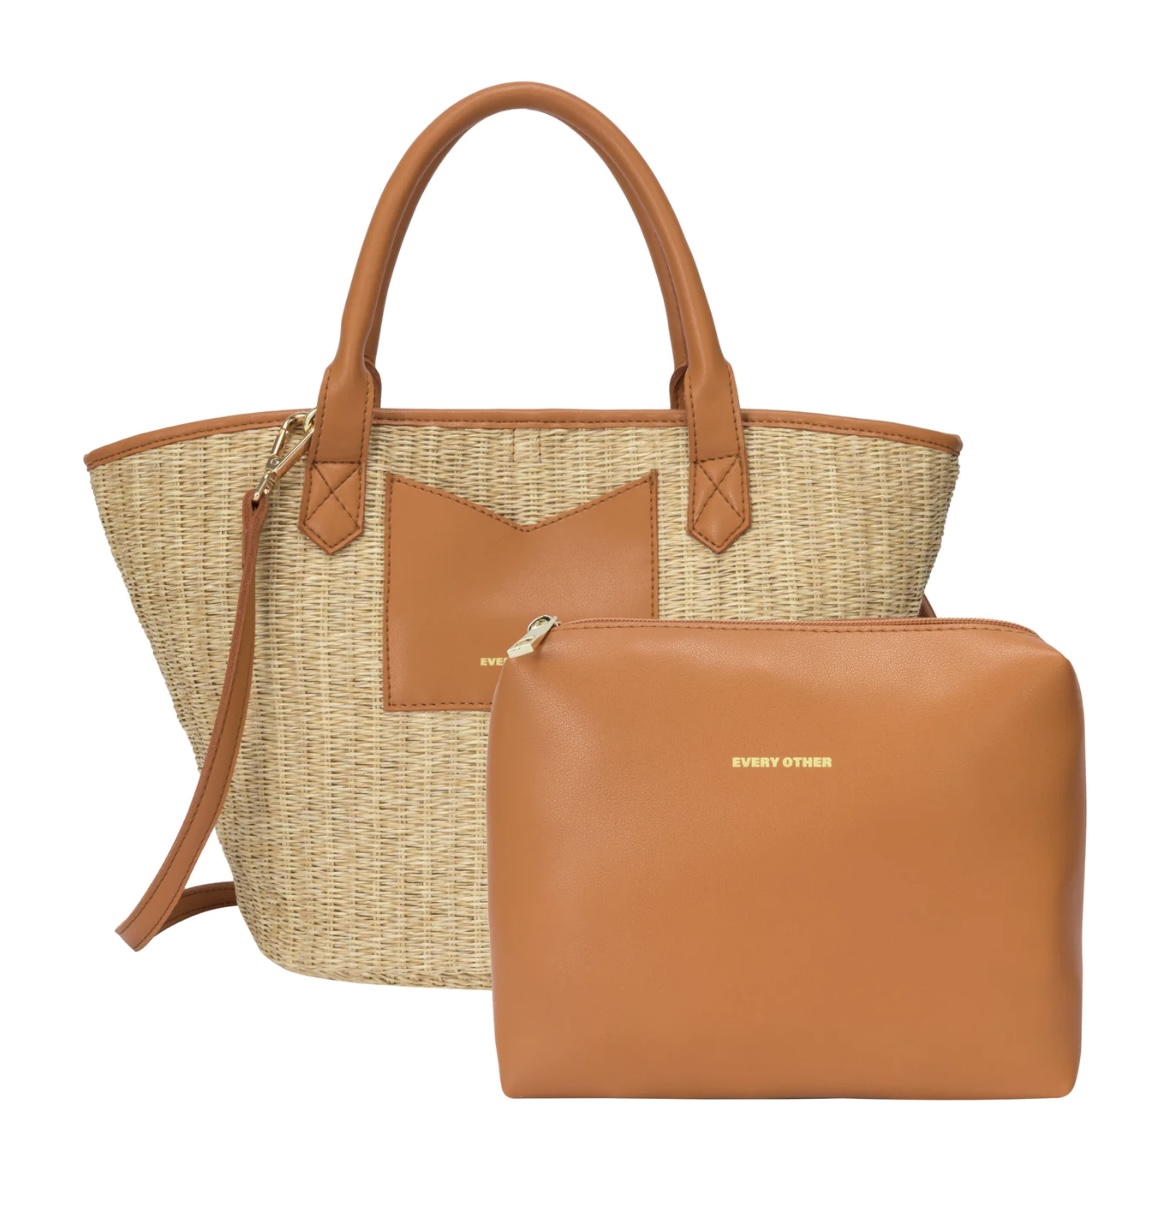 Every Other Large Twin Strap Tote style Bag Tan